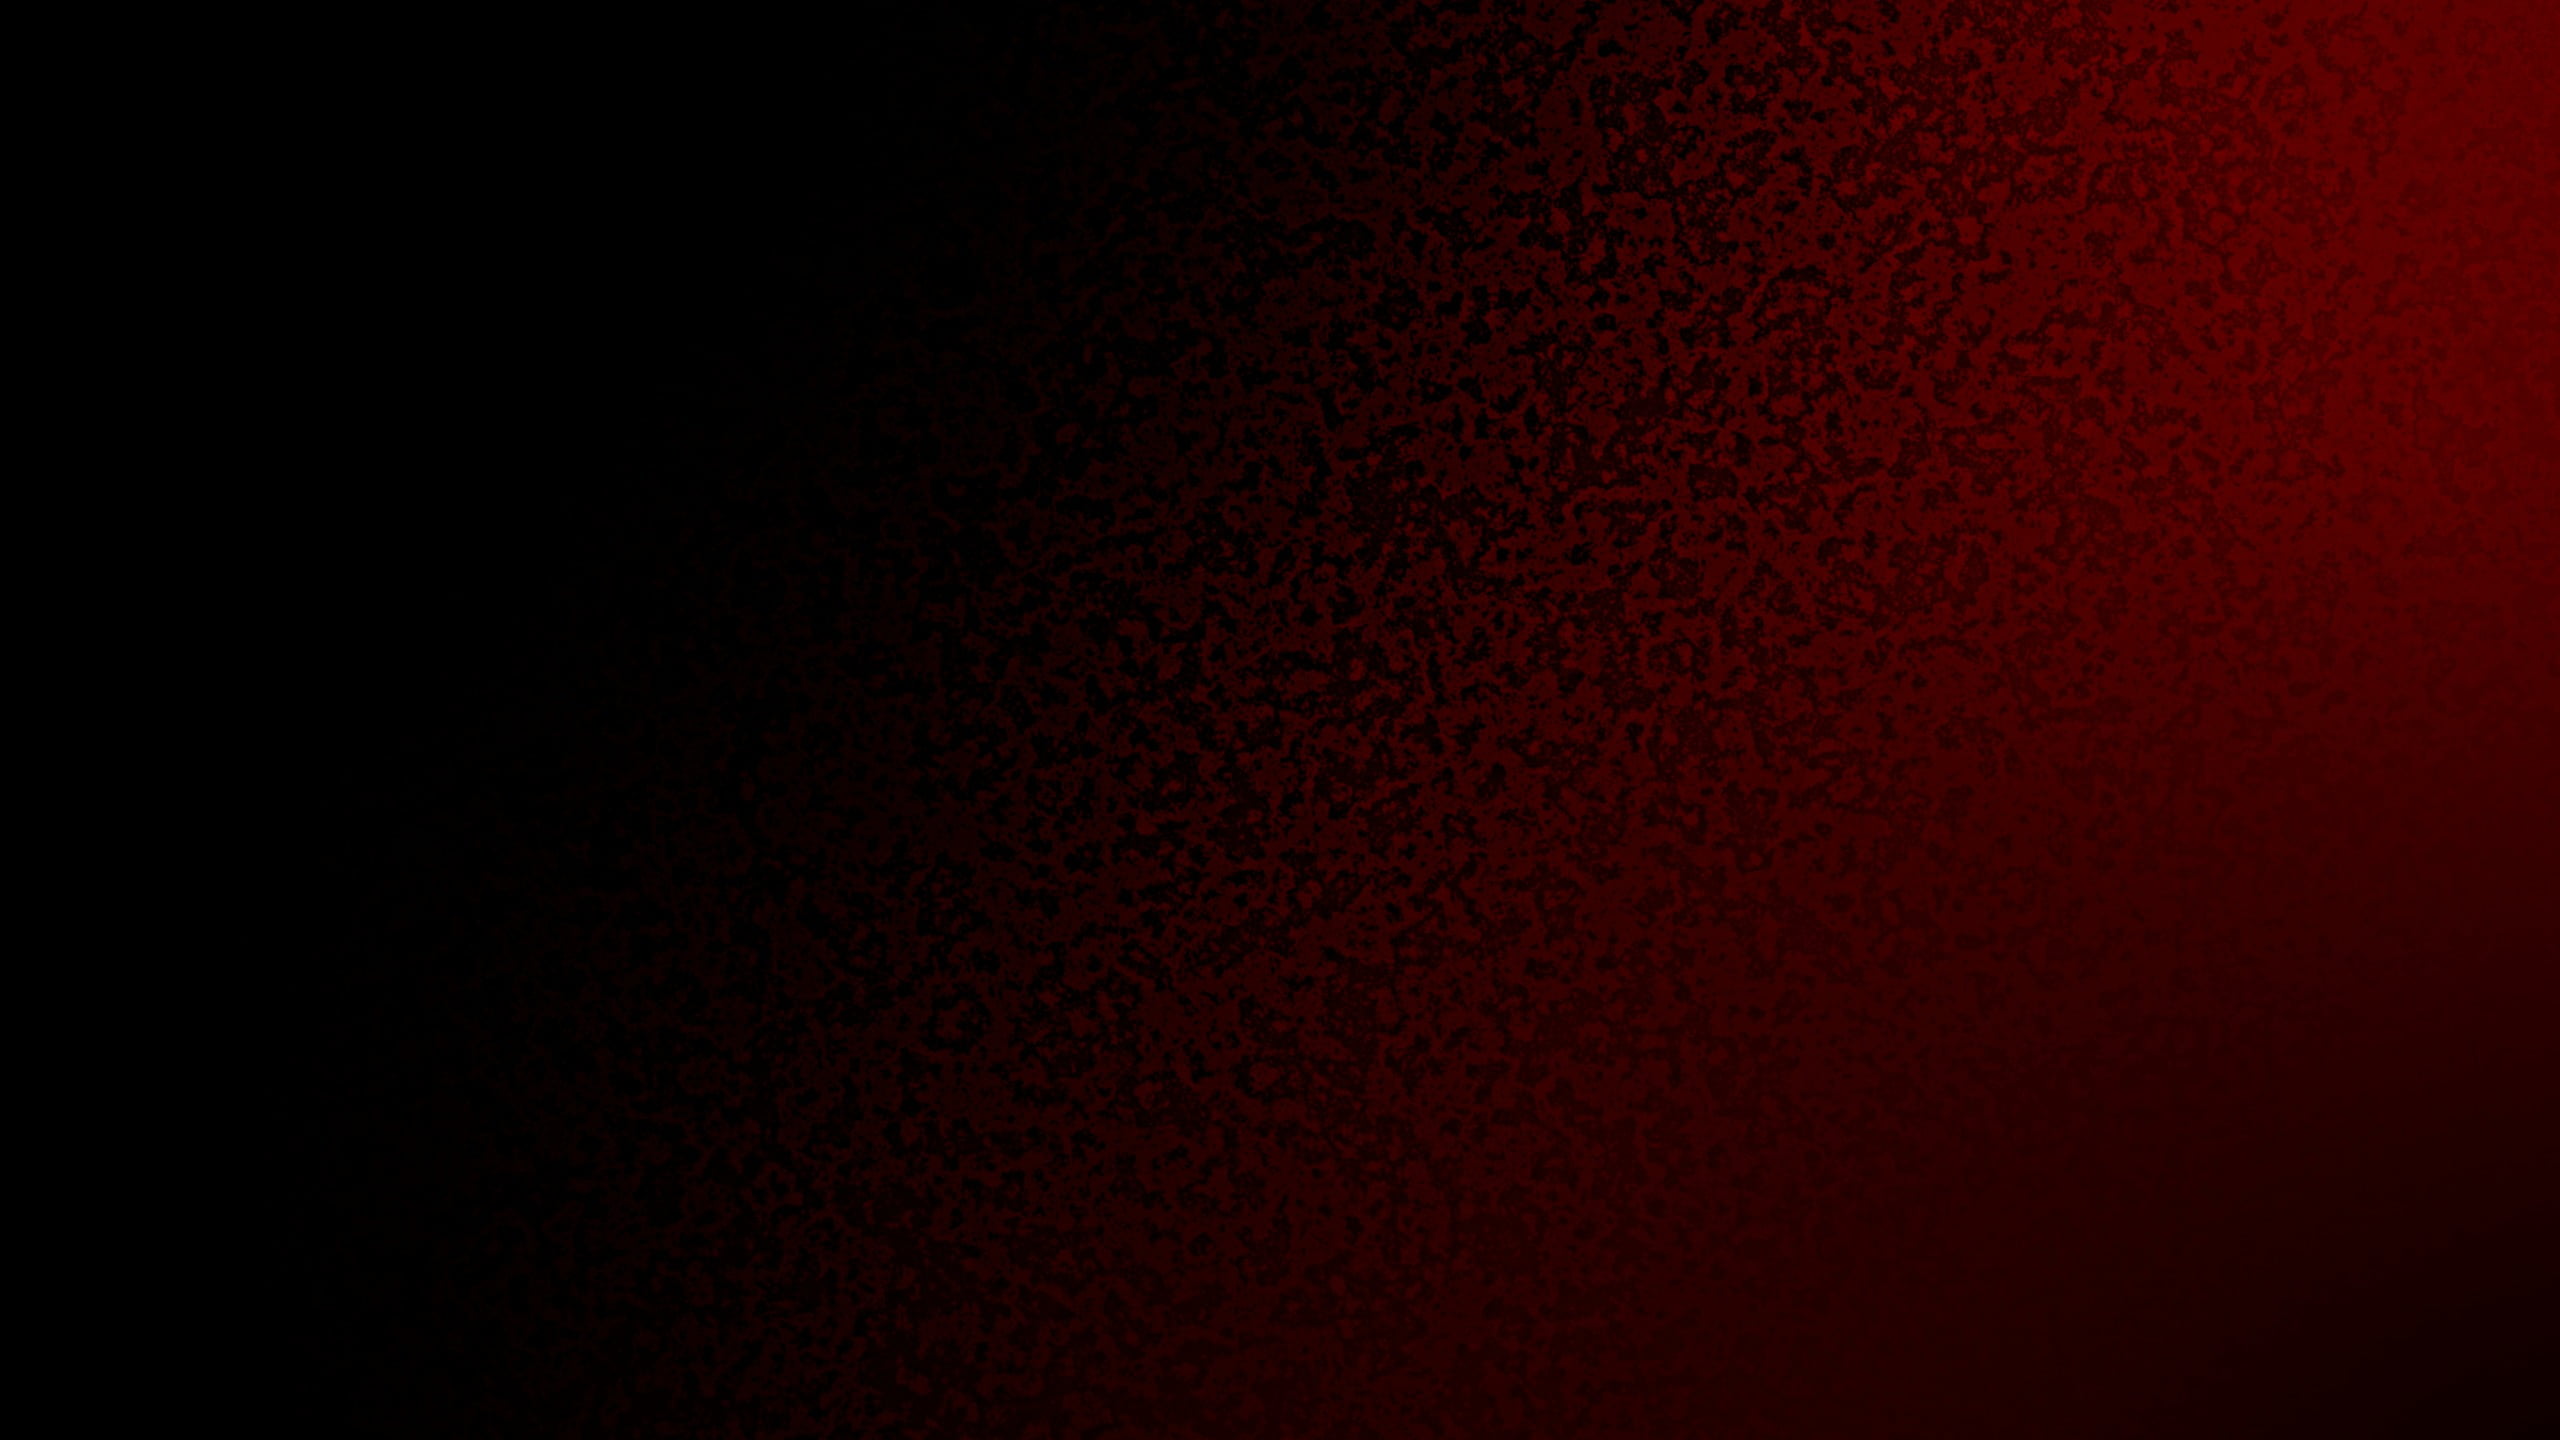 black and white area rug, abstract, dark, simple, red, backgrounds